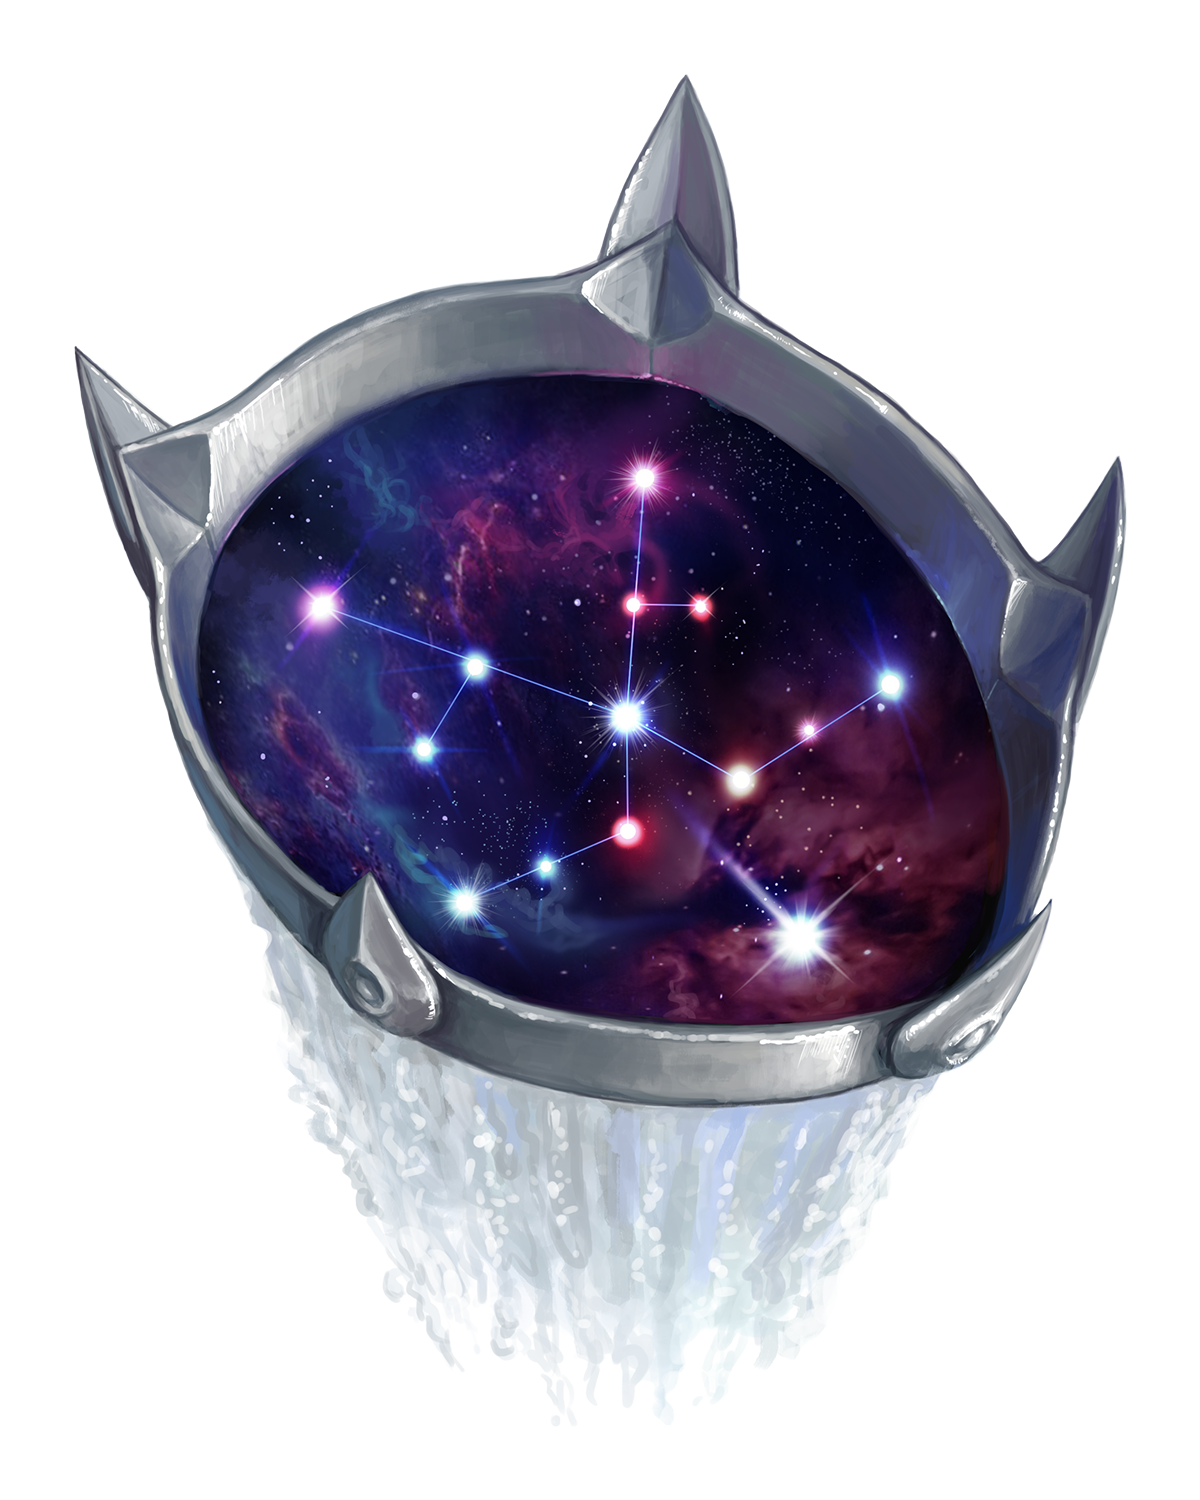 The silver waterfall helm tilts backward, revealing the Glyph of the Open Road constellation within